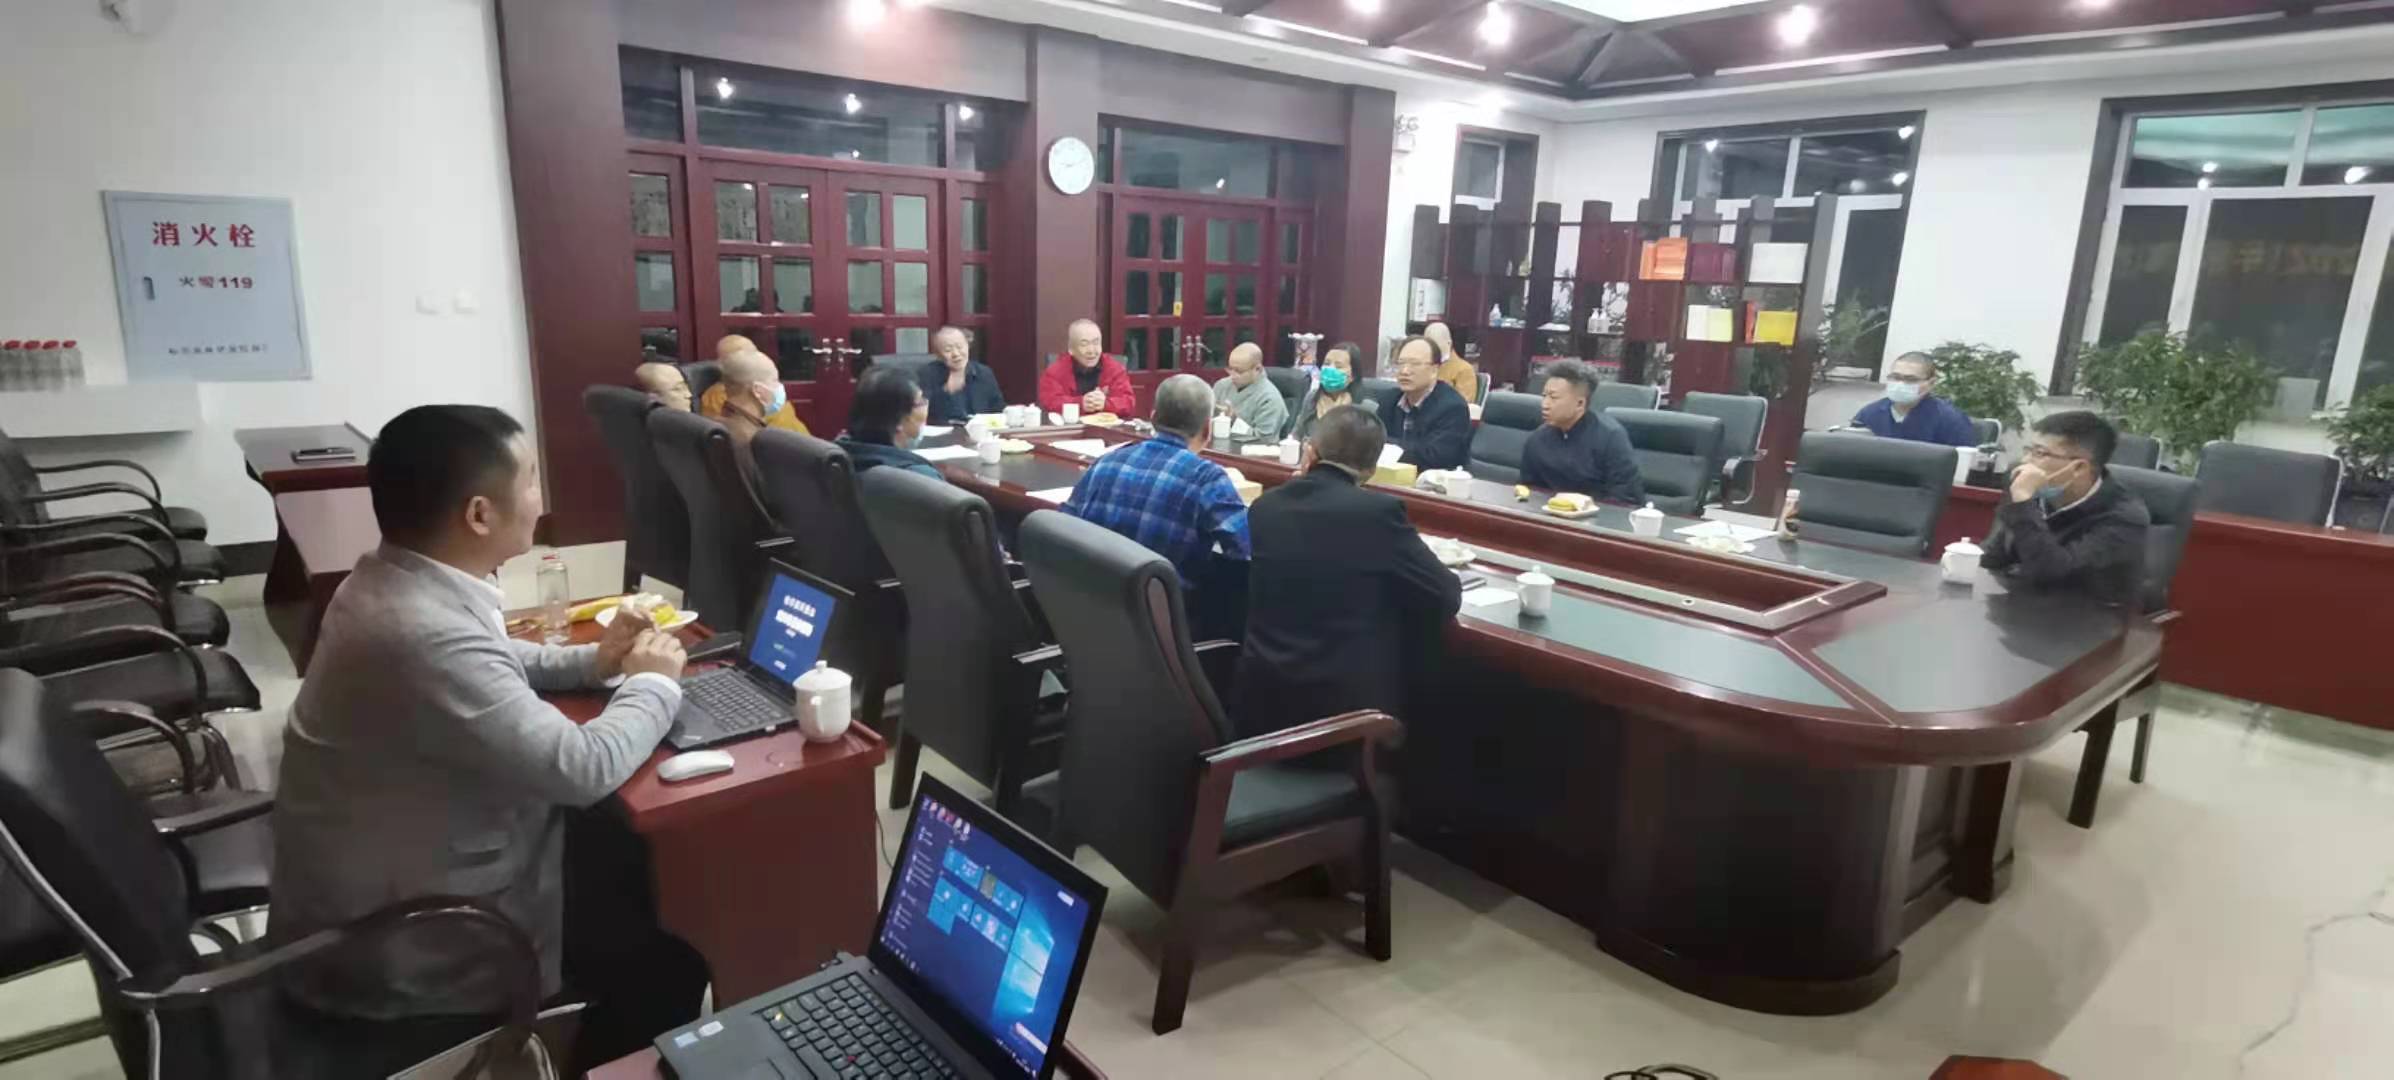 The interim report meeting of master plan of Harbin Longxing Temple compiled by druan was held in Harbin(图1)